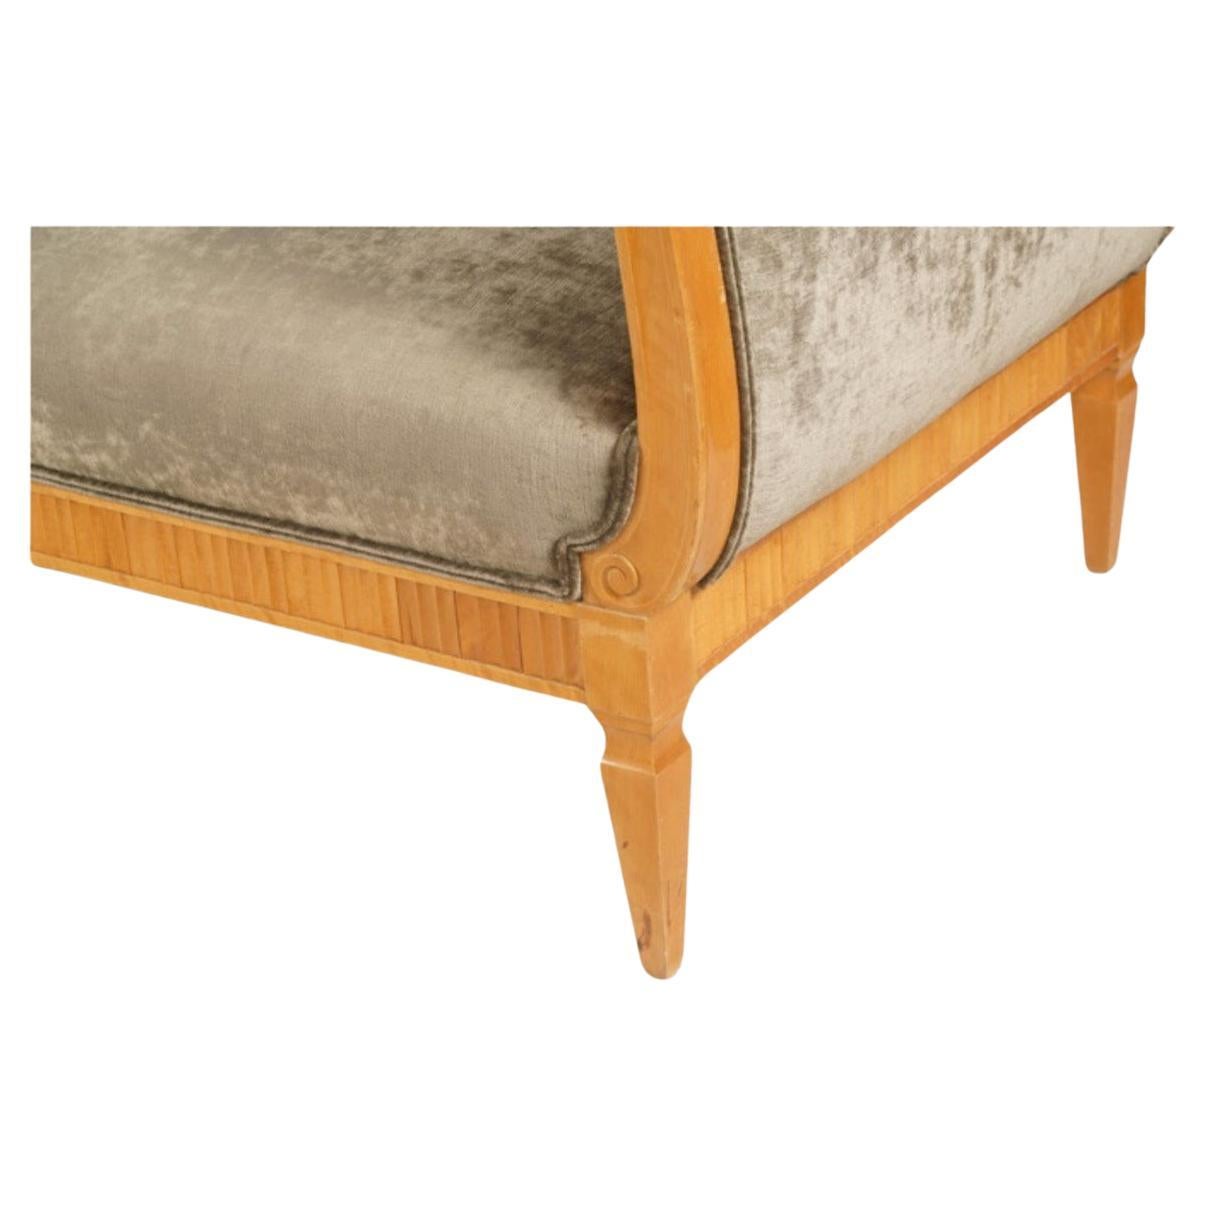 19th Century Neoclassical Swedish Satinwood Daybed or Recamier